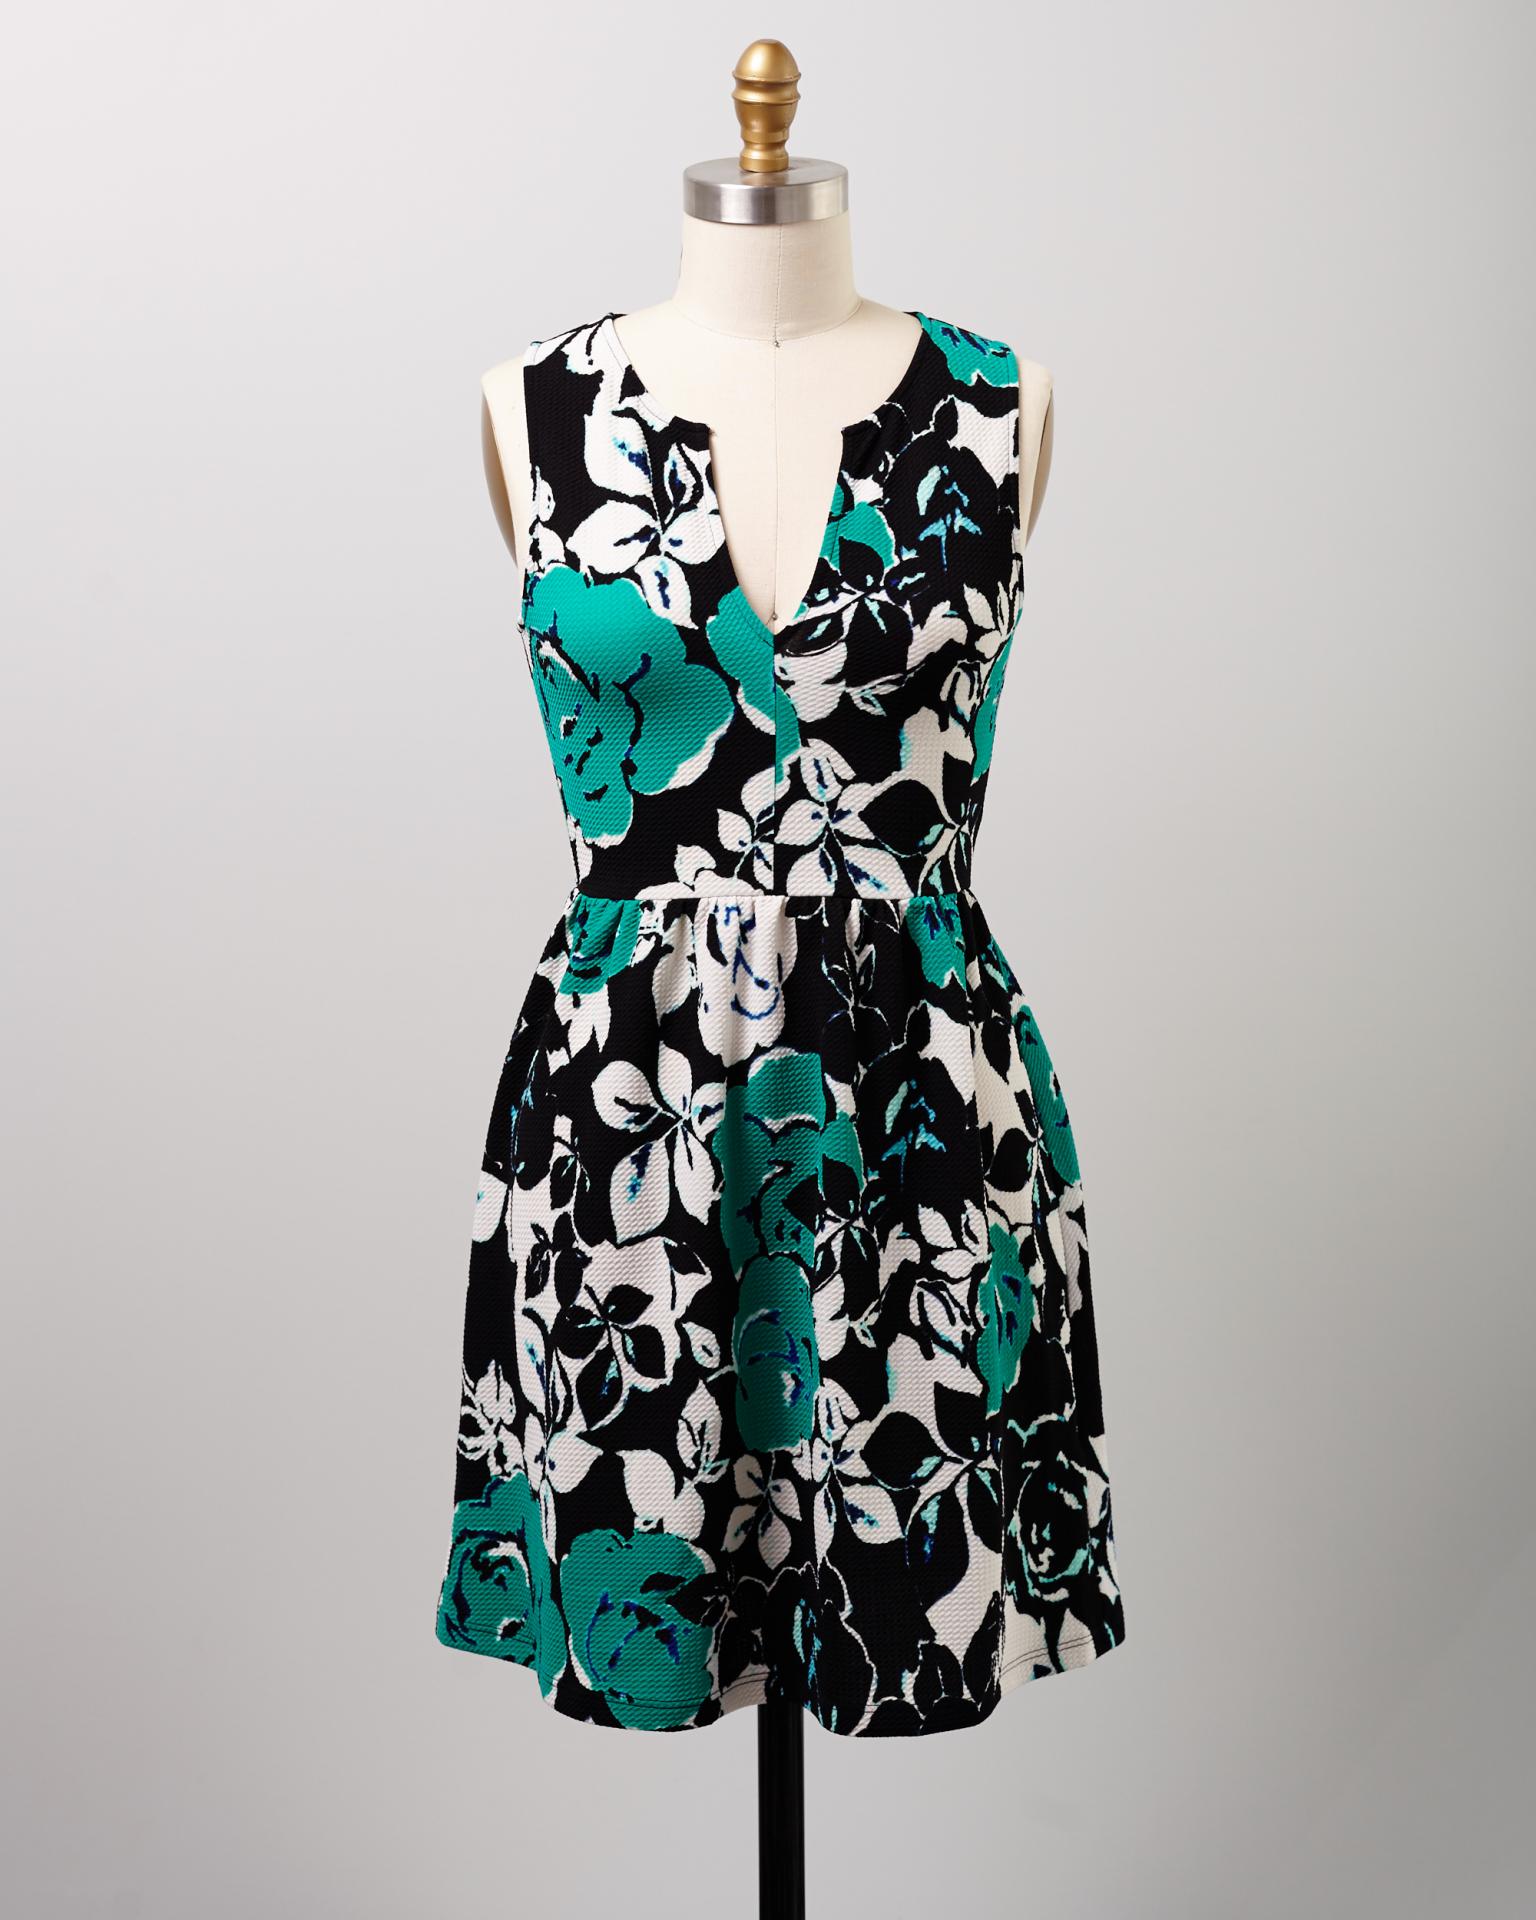 This gorgeous, sweet dress is a new-with-tags Modcloth find, but at an incredible consignment bargain find price! Snatch yours up now from this fantastic give-back shopping site before they're gone! 